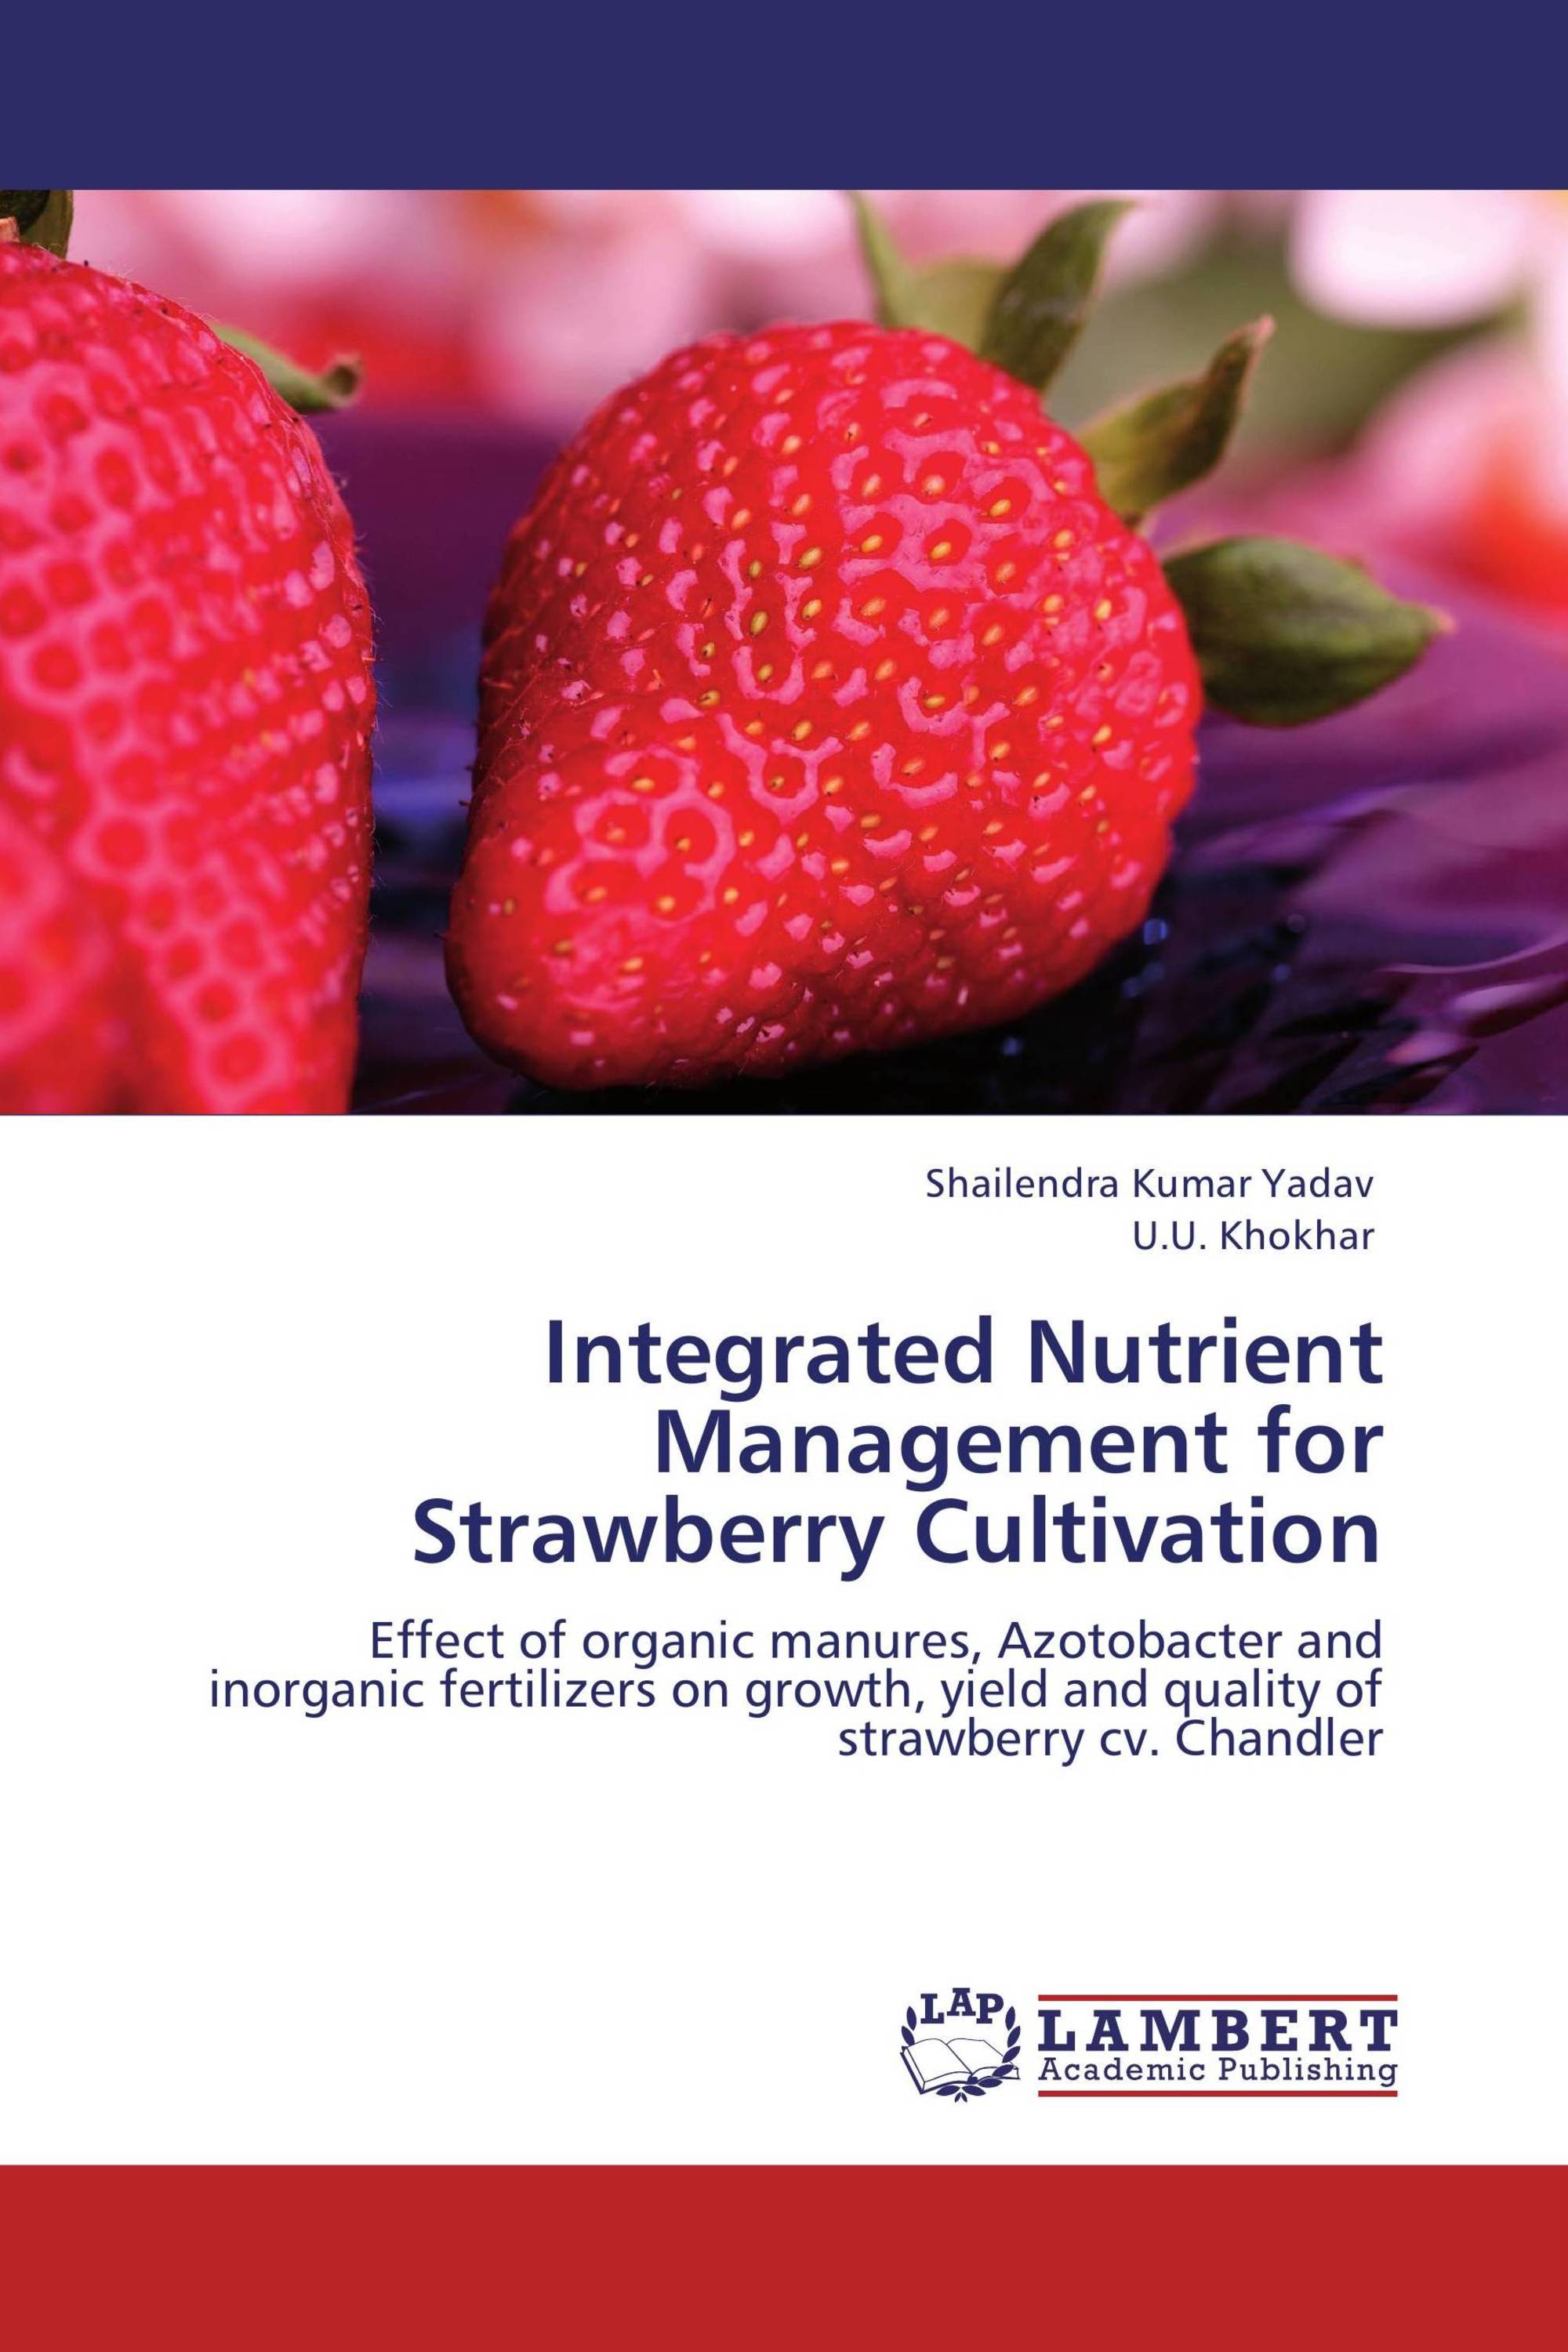 Thesis on integrated nutrient management